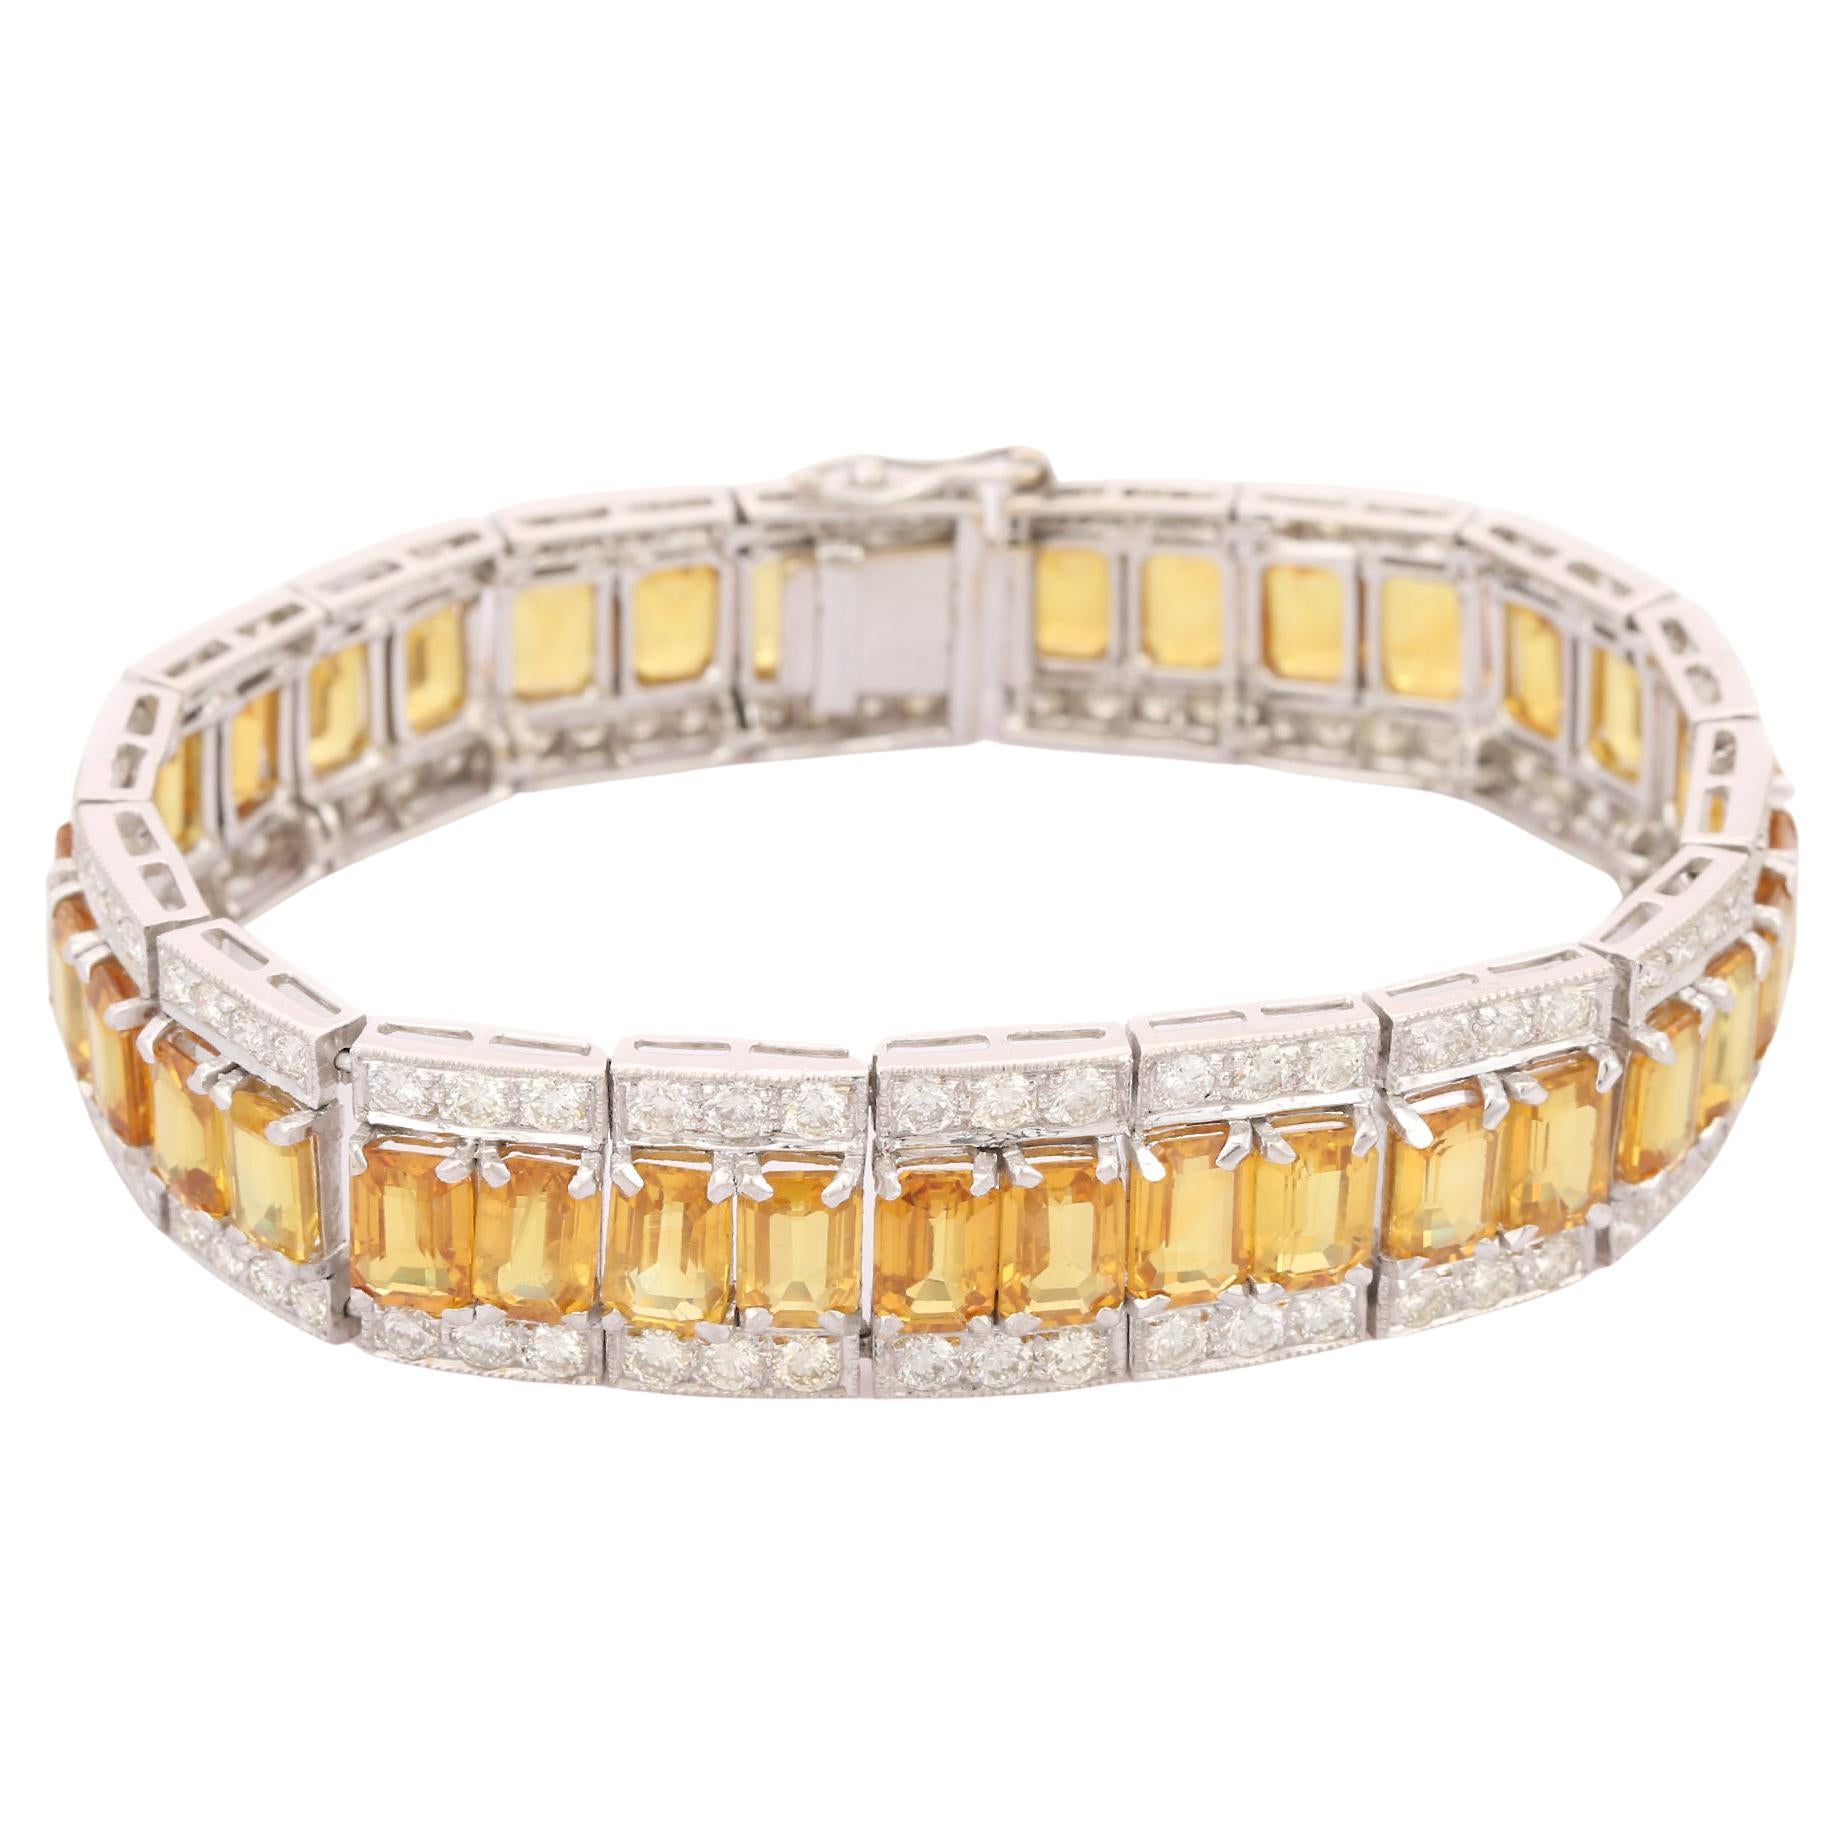 This Yellow Sapphire Diamond Tennis Bracelet in 18K gold showcases 36 endlessly sparkling natural yellow sapphire, weighing 37.87 carat and 144 pieces of diamonds weighing 5.34 carat. It measures 7 inches long in length. 
Sapphire stimulate